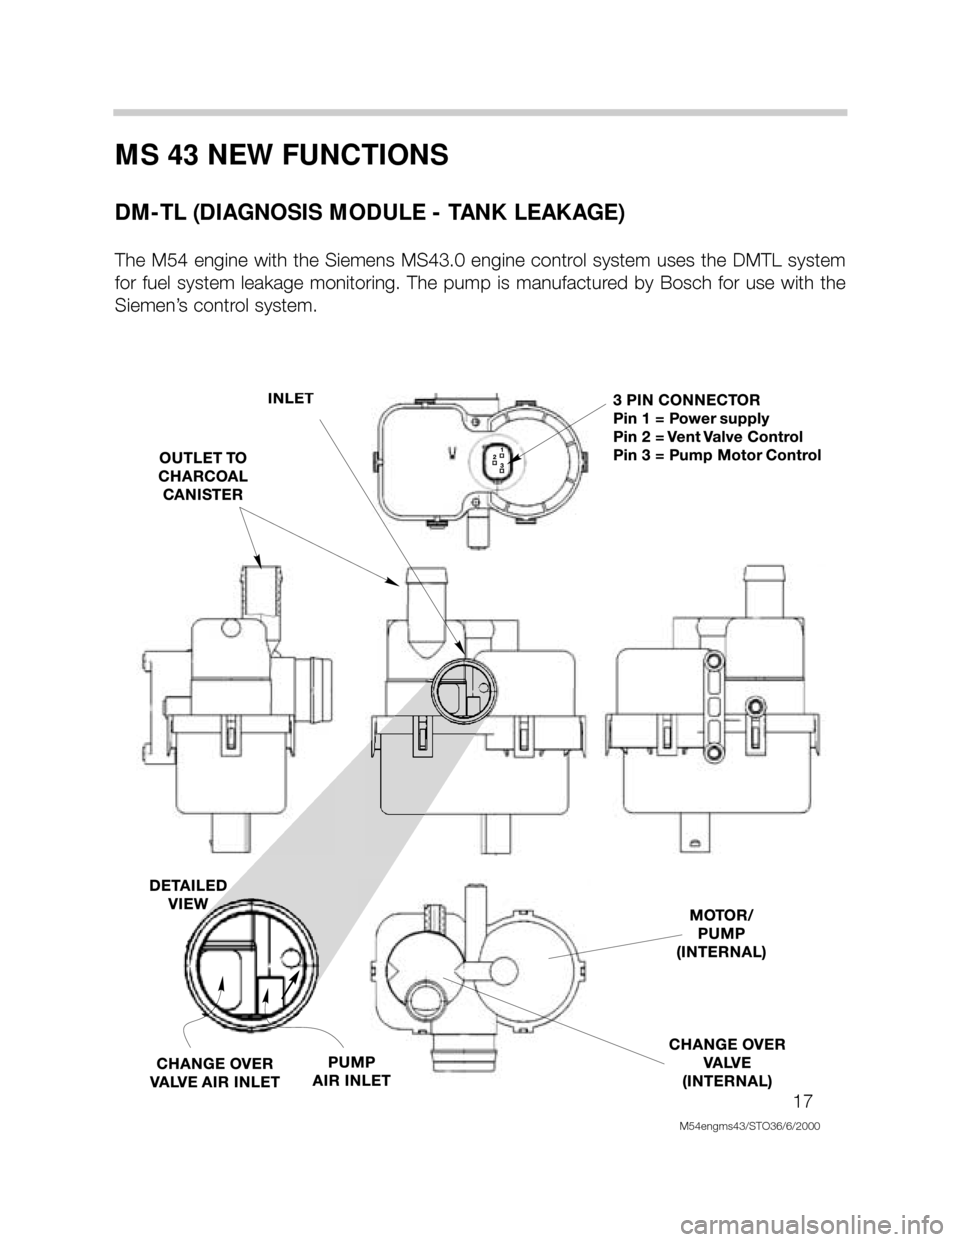 BMW X5 2001 E53 M54 Engine User Guide 17
M54engms43/STO36/6/2000
MS 43 NEW FUNCTIONS
DM-TL (DIAGNOSIS MODULE - TANK LEAKAGE)
The  M54  engine  with  the  Siemens  MS43.0  engine  control  system  uses  the  DMTL  system
for  fuel  system 